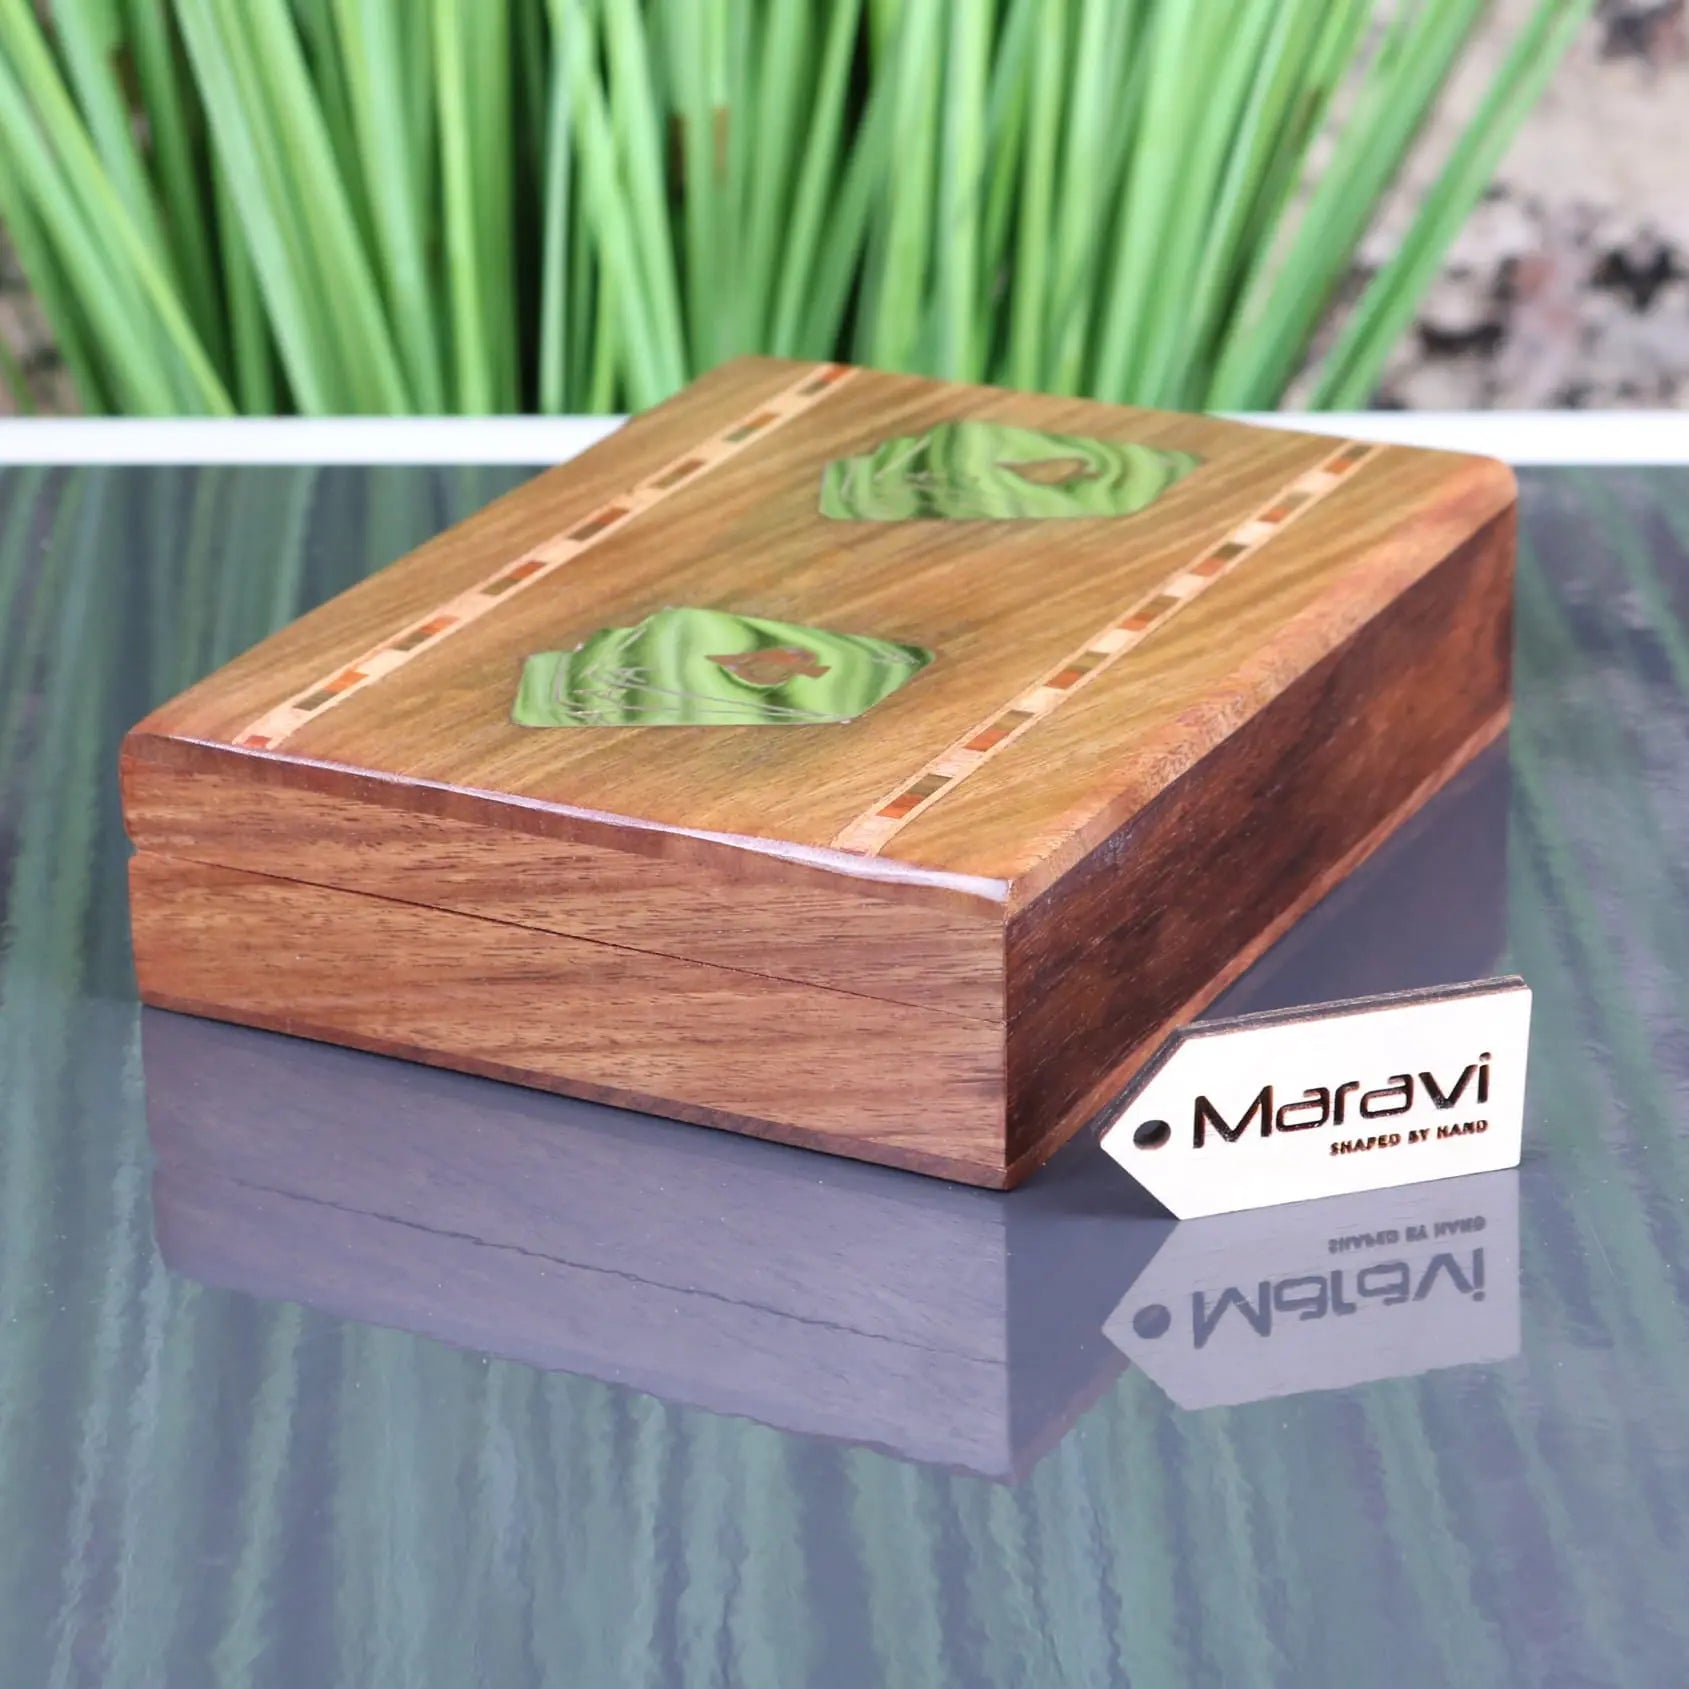 Begunia Double Wooden Playing Card Box - Side View